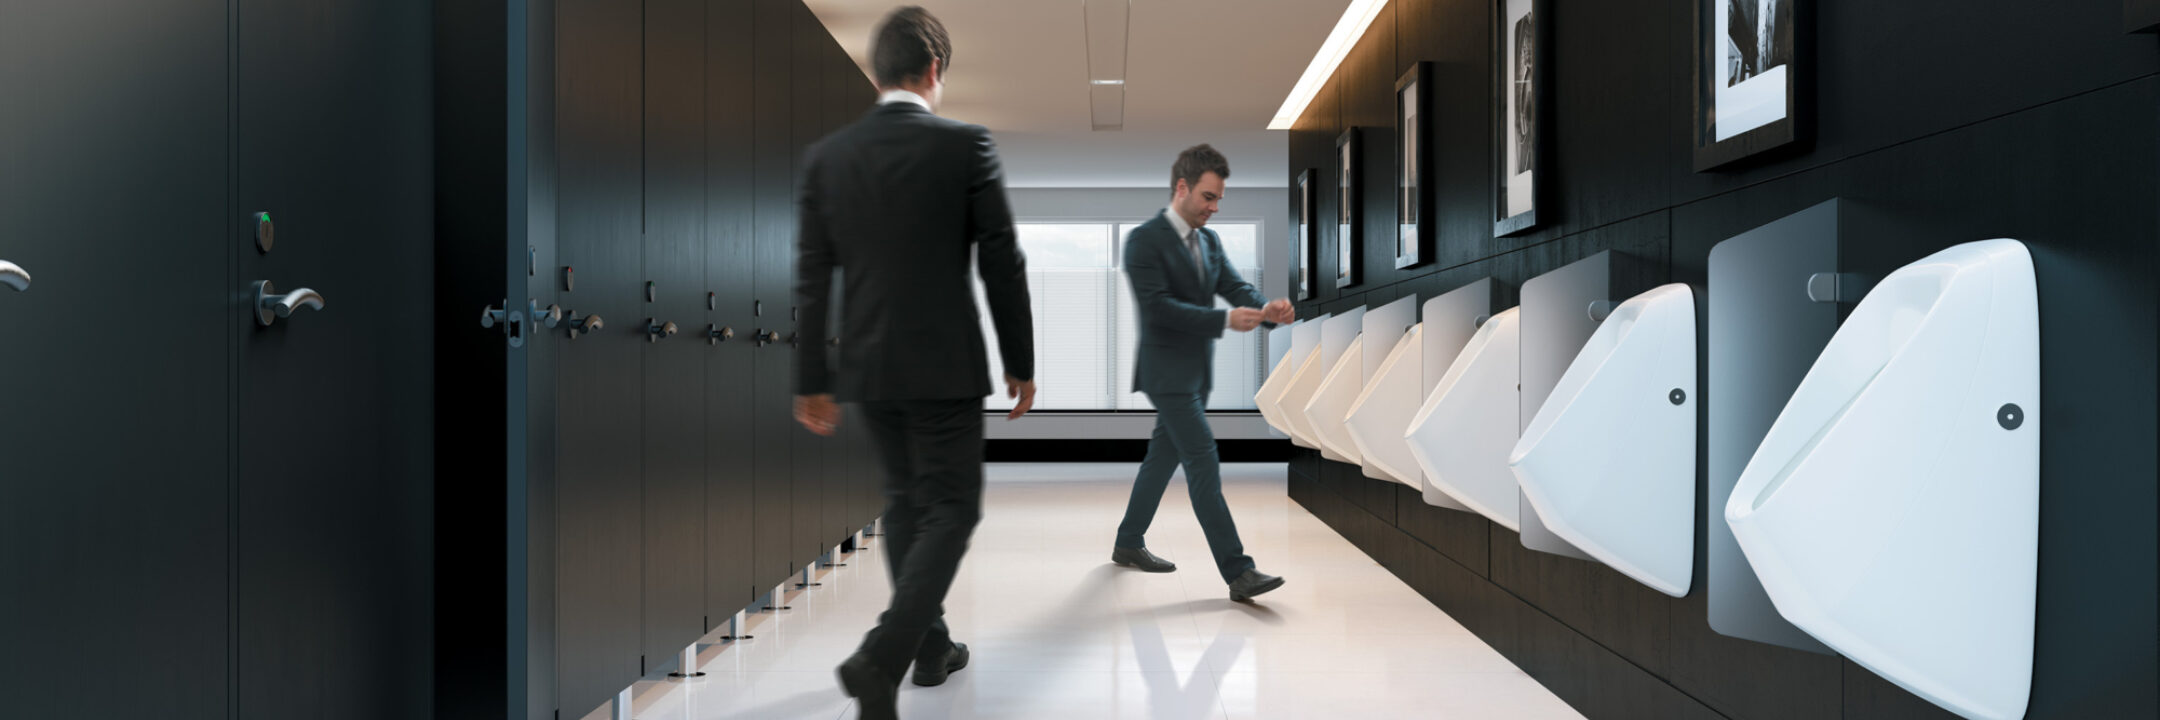 Jets image 3 D interior urinal porcelain wall office building CON